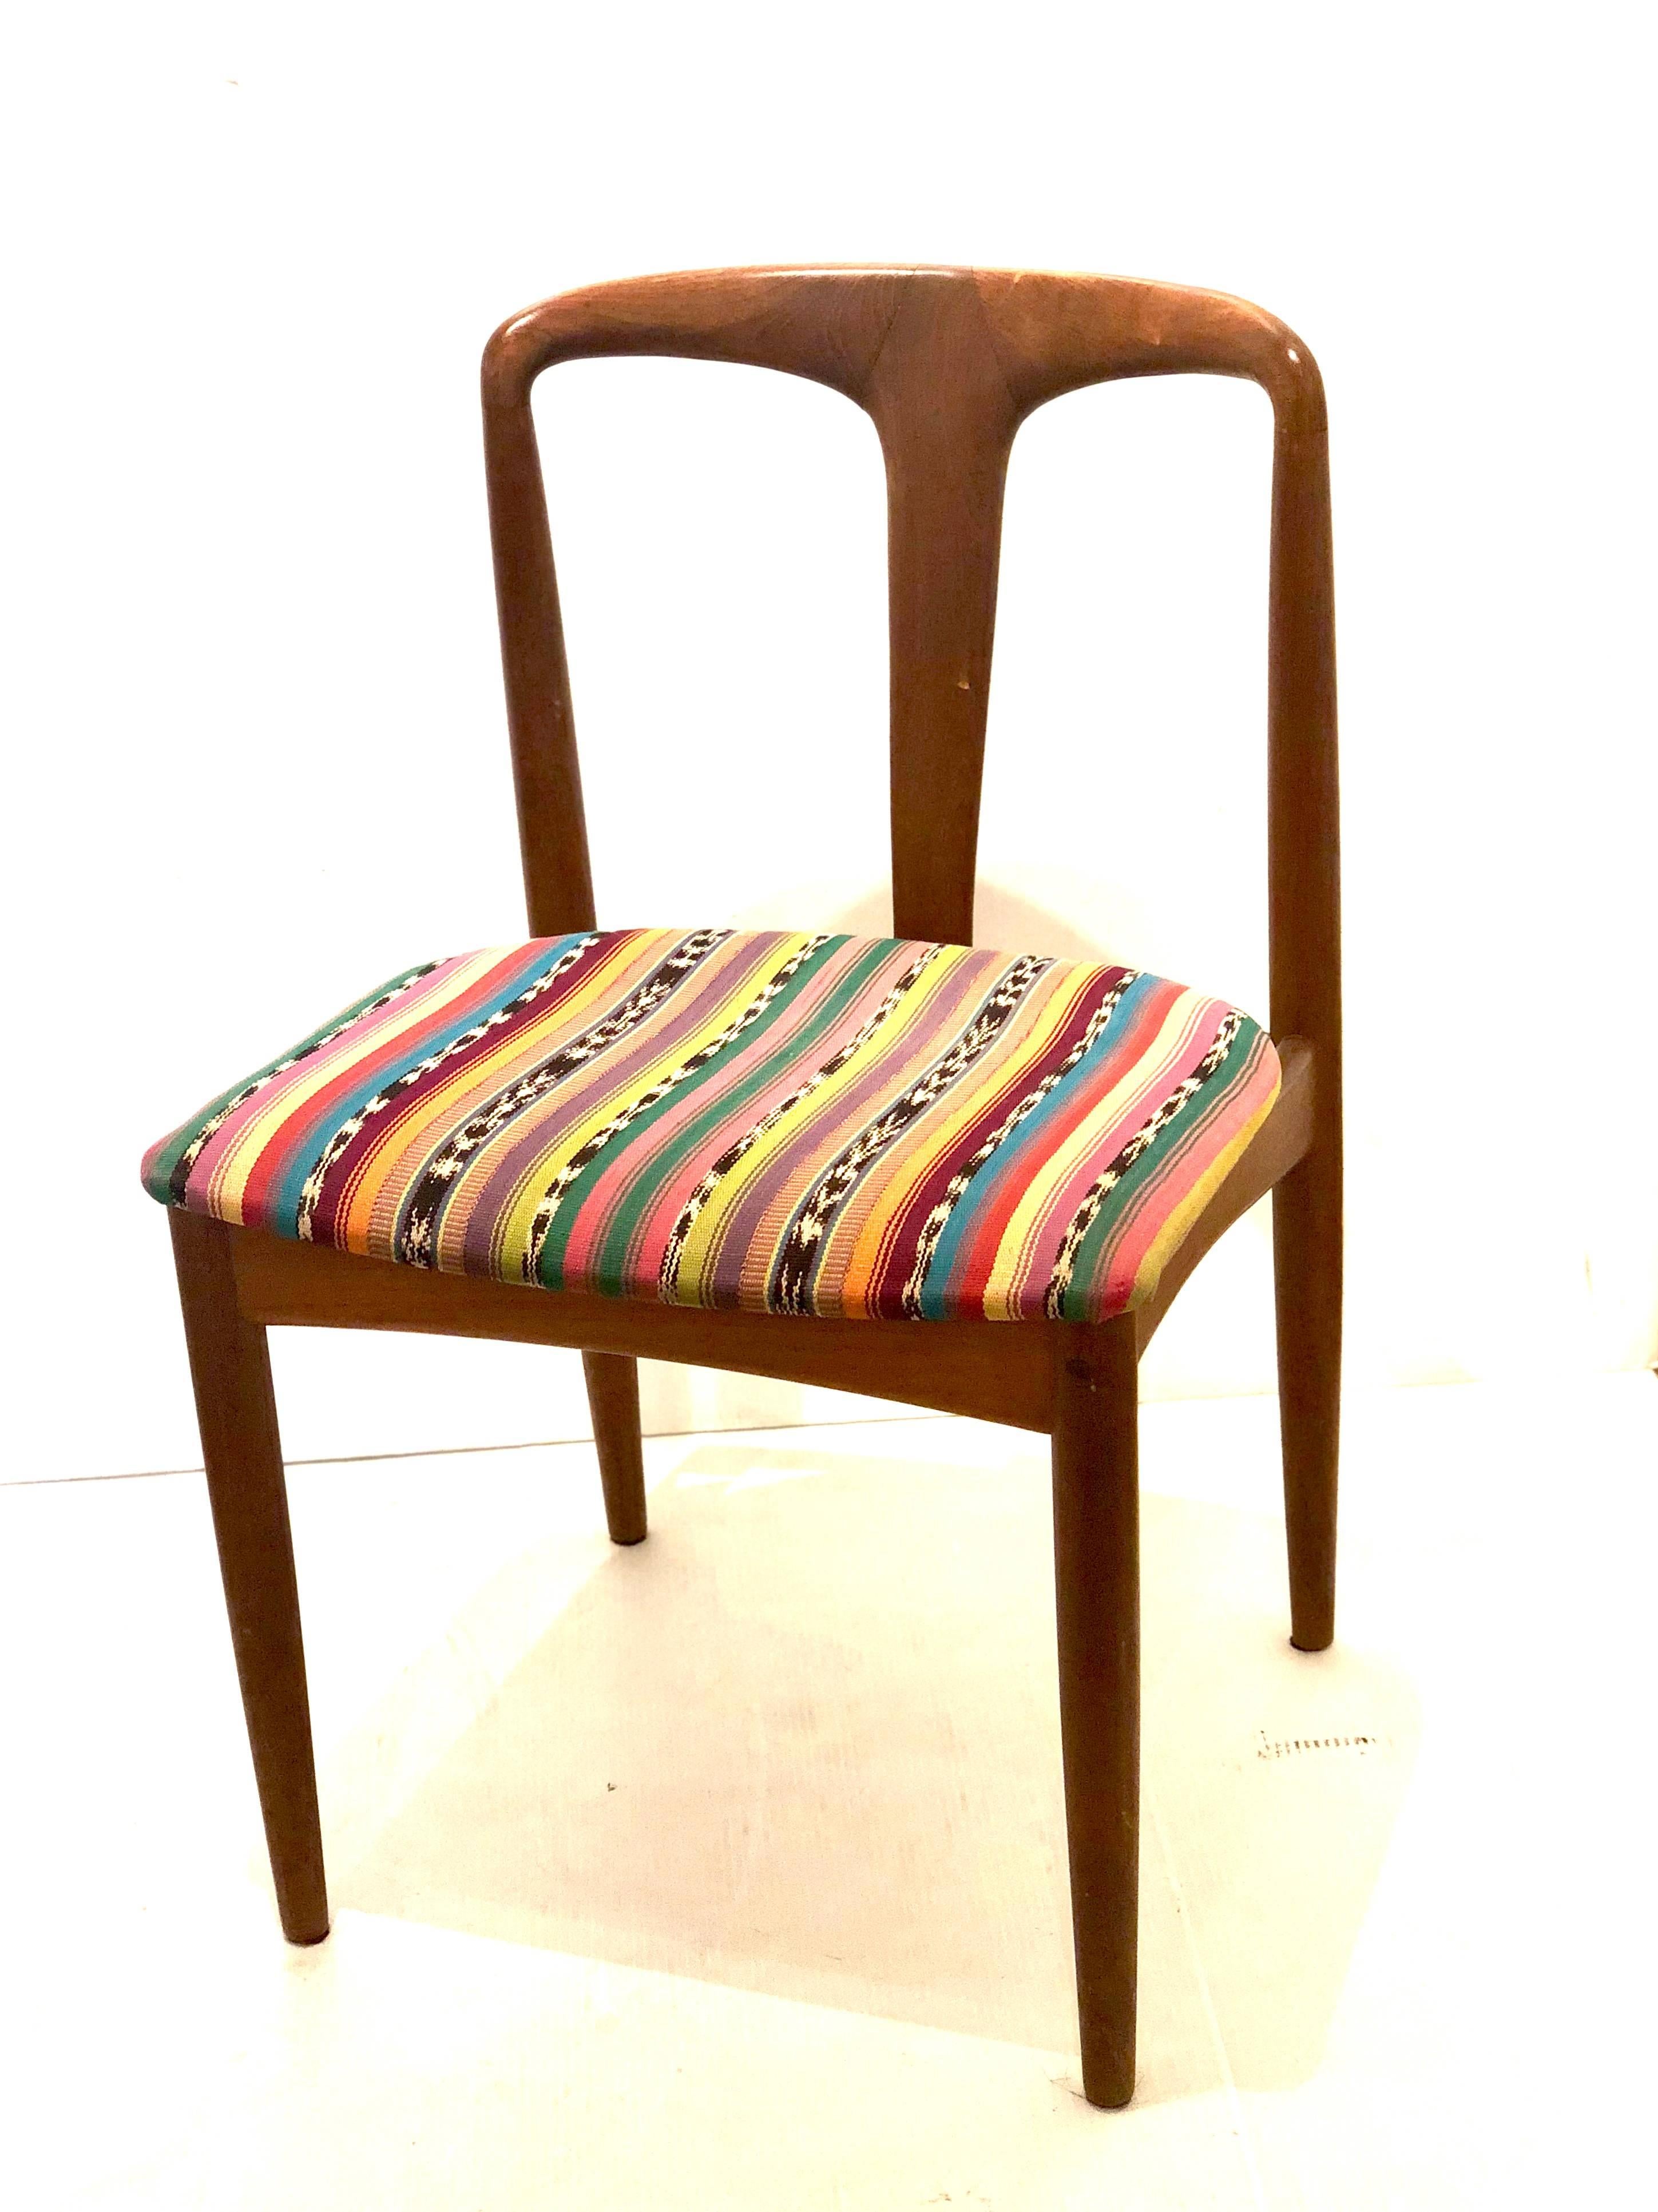 Beautiful solid sculpted teak chair designed by Johannes Andersen for Uldum Mobelfabrik, circa 1950's, nice and solid construction beautiful lines freshly refinished and recover in Mexican textile.